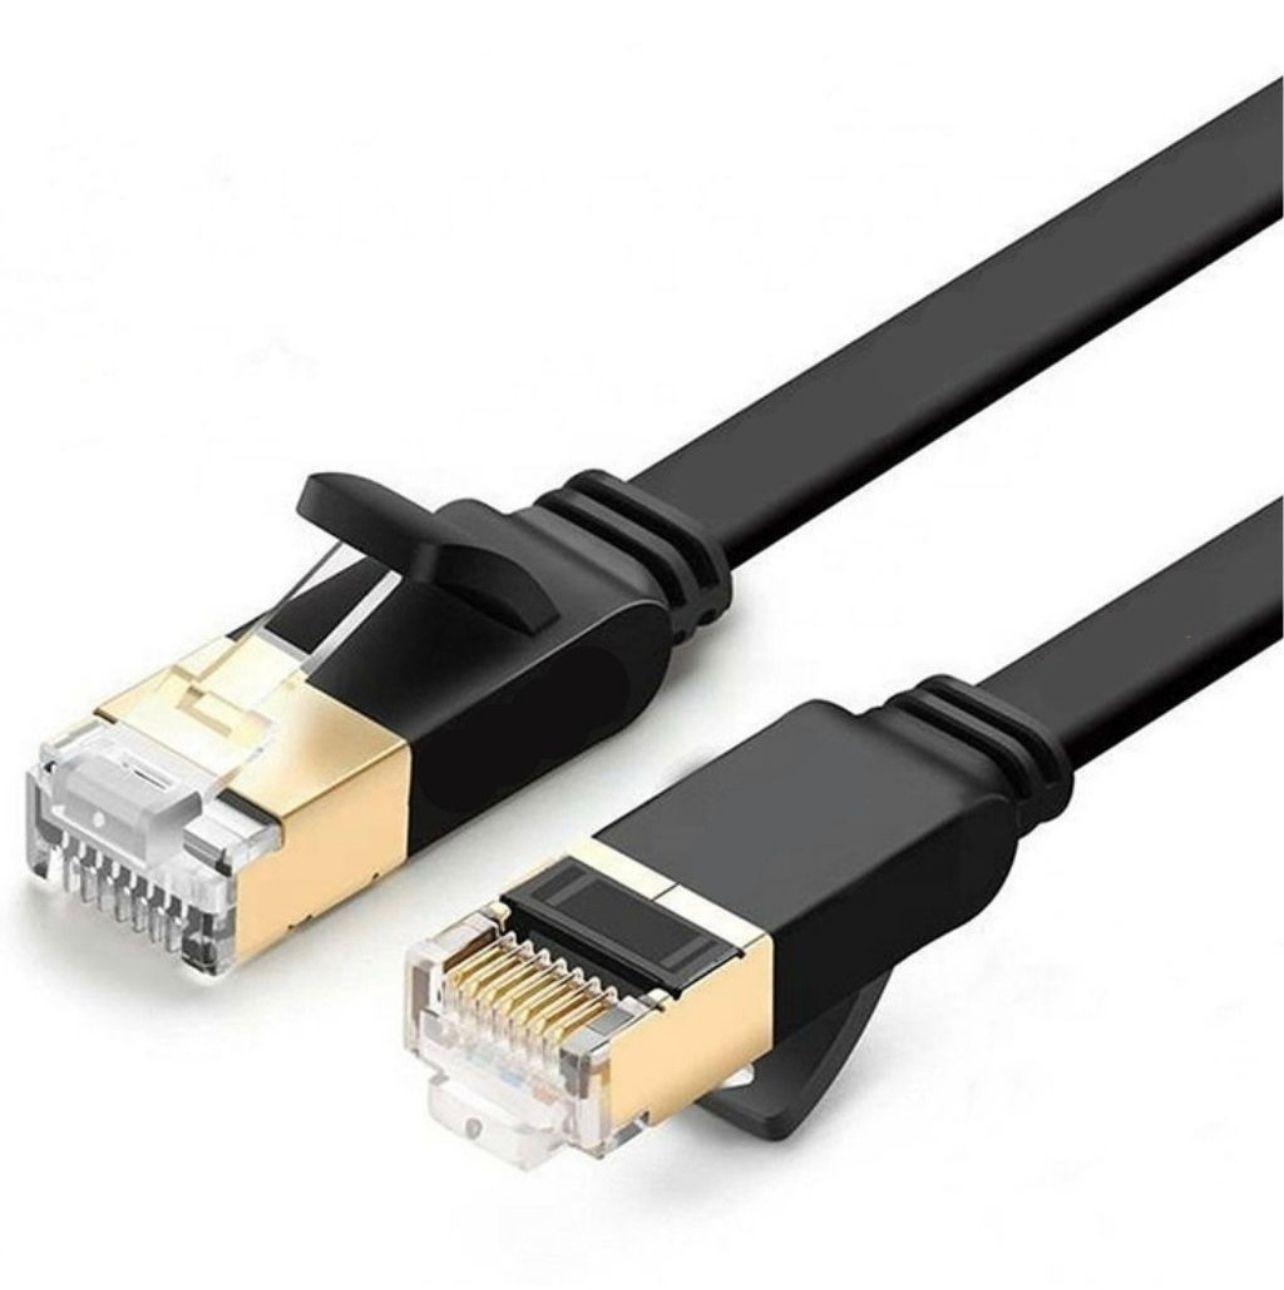 Cable Red Plano Cat 7 15 Metros Rj45 Utp Ethernet 600 Mhz